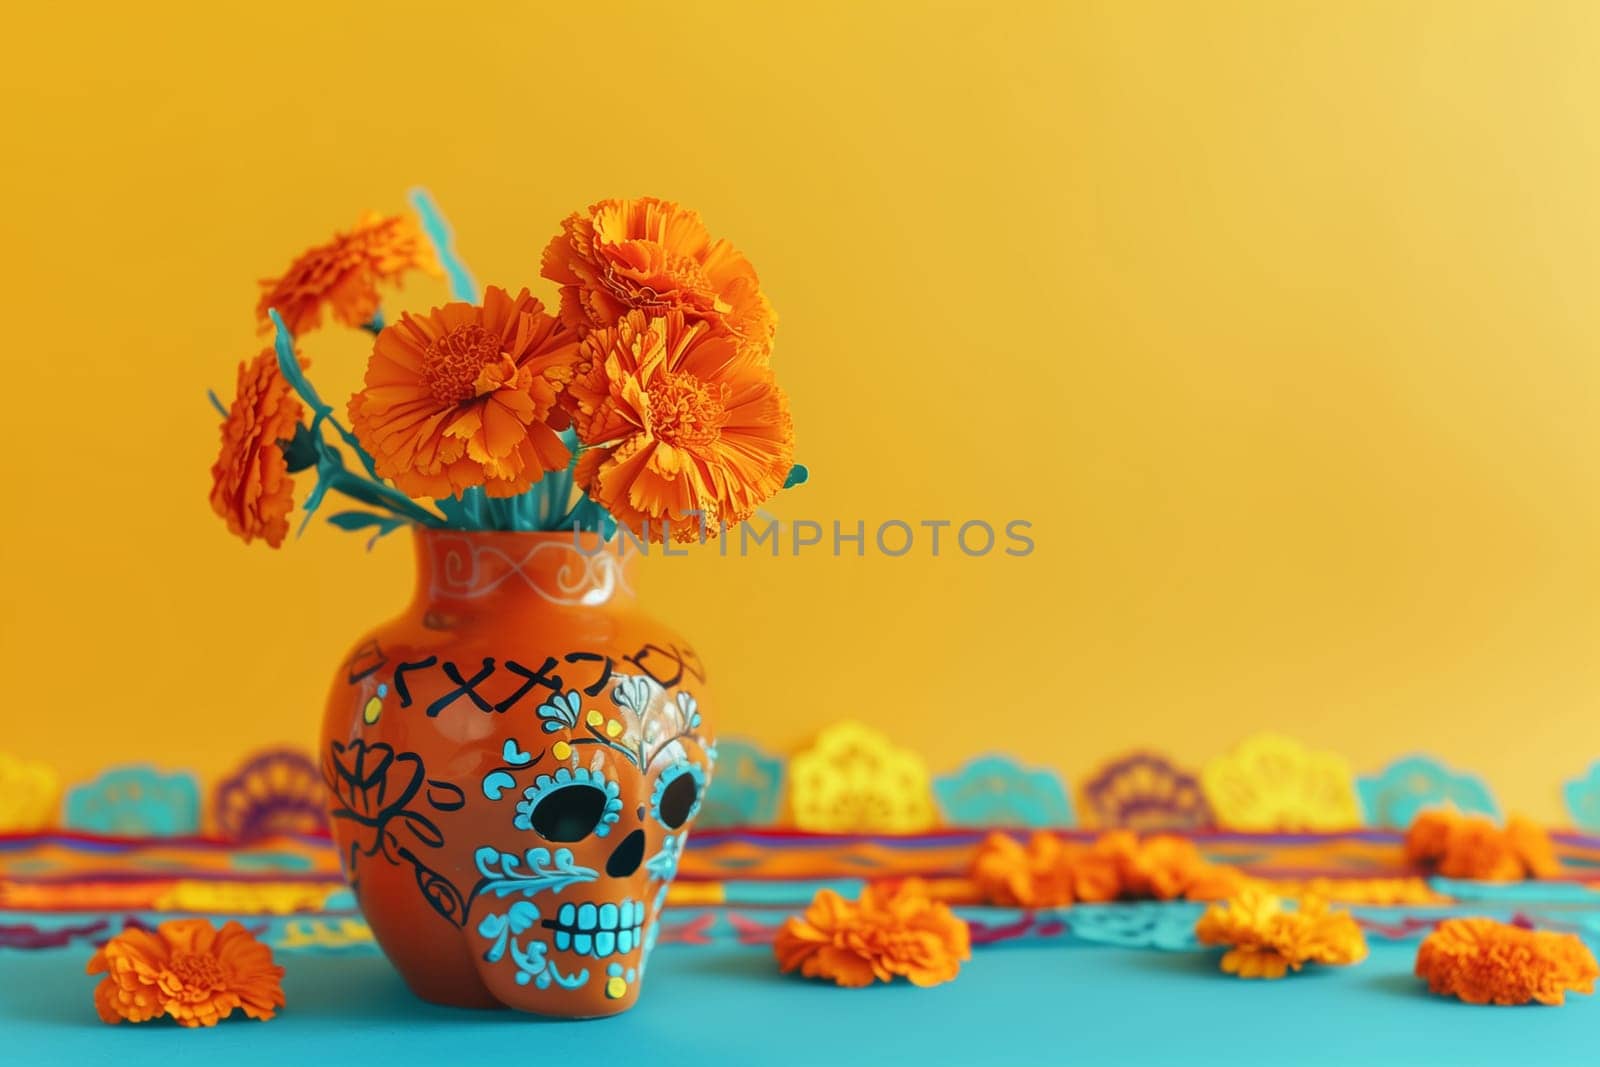 Skull Vase With Flowers on Table by Sd28DimoN_1976